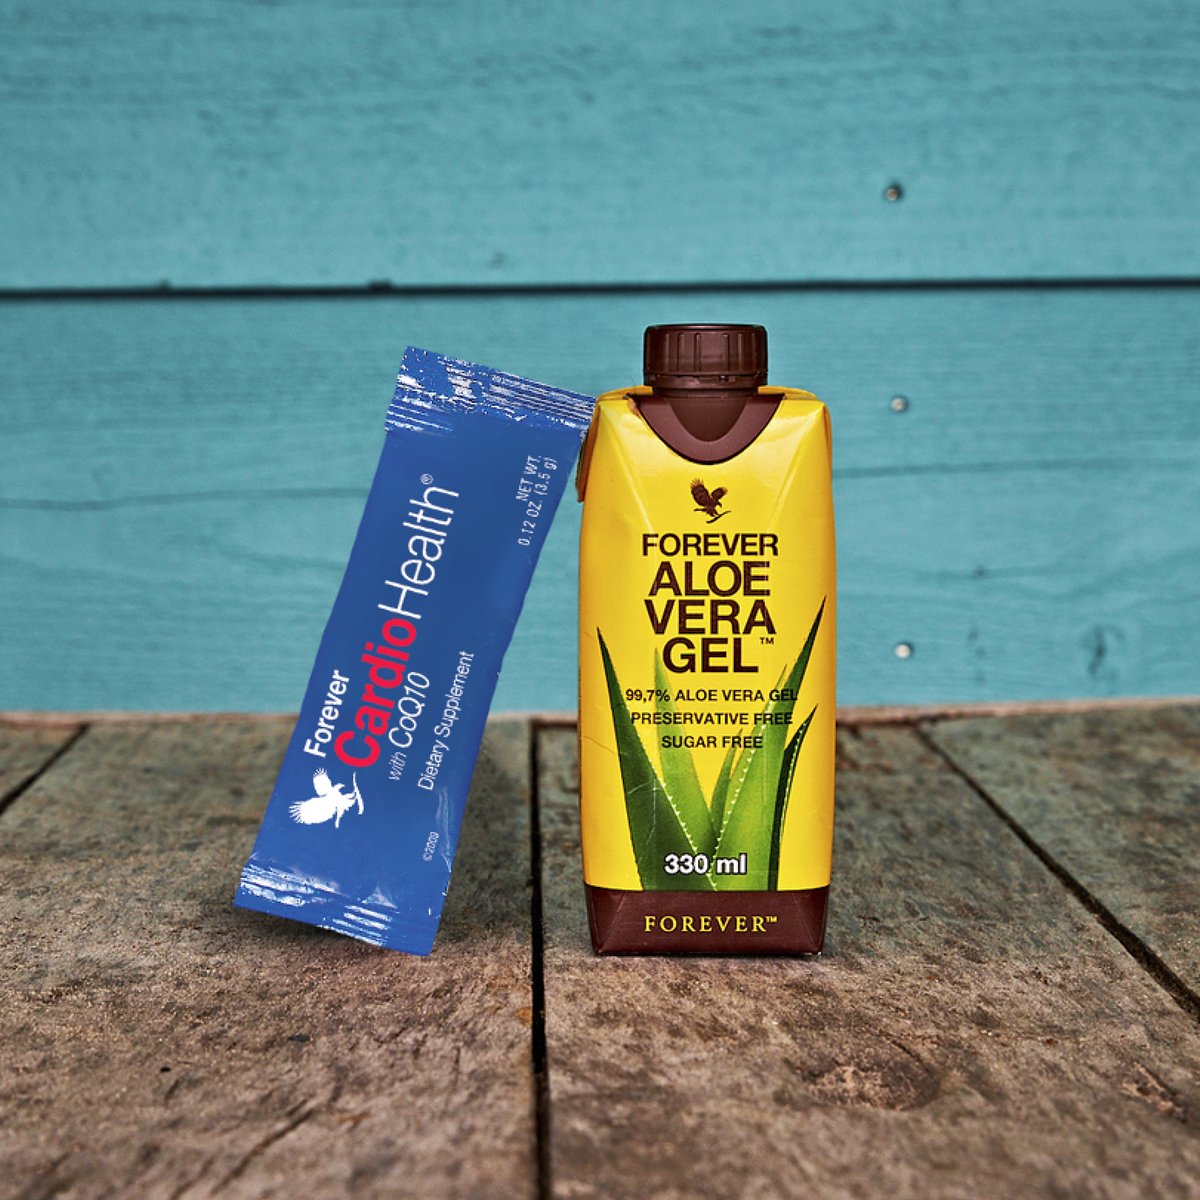 Did you know that February is #HeartMonth? Forever CardioHealth is a great way to help support healthy heart function! Just pour one stick pack into your aloe and enjoy!